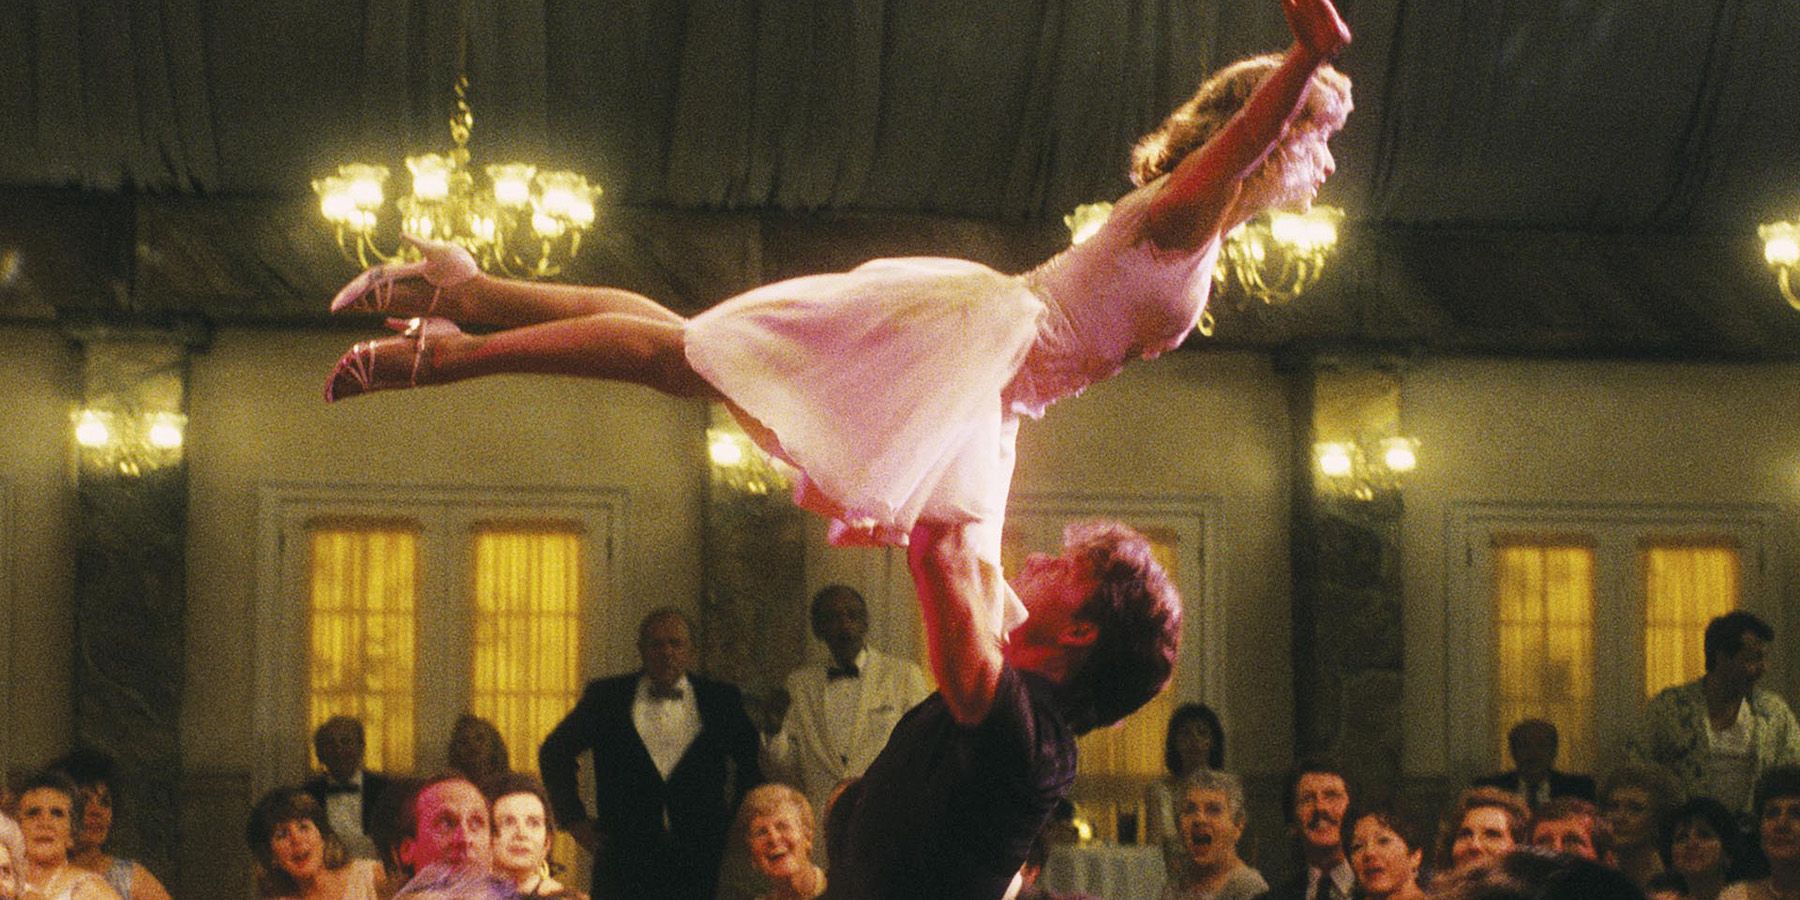 Johnny lifts Baby during their final dance in Dirty Dancing